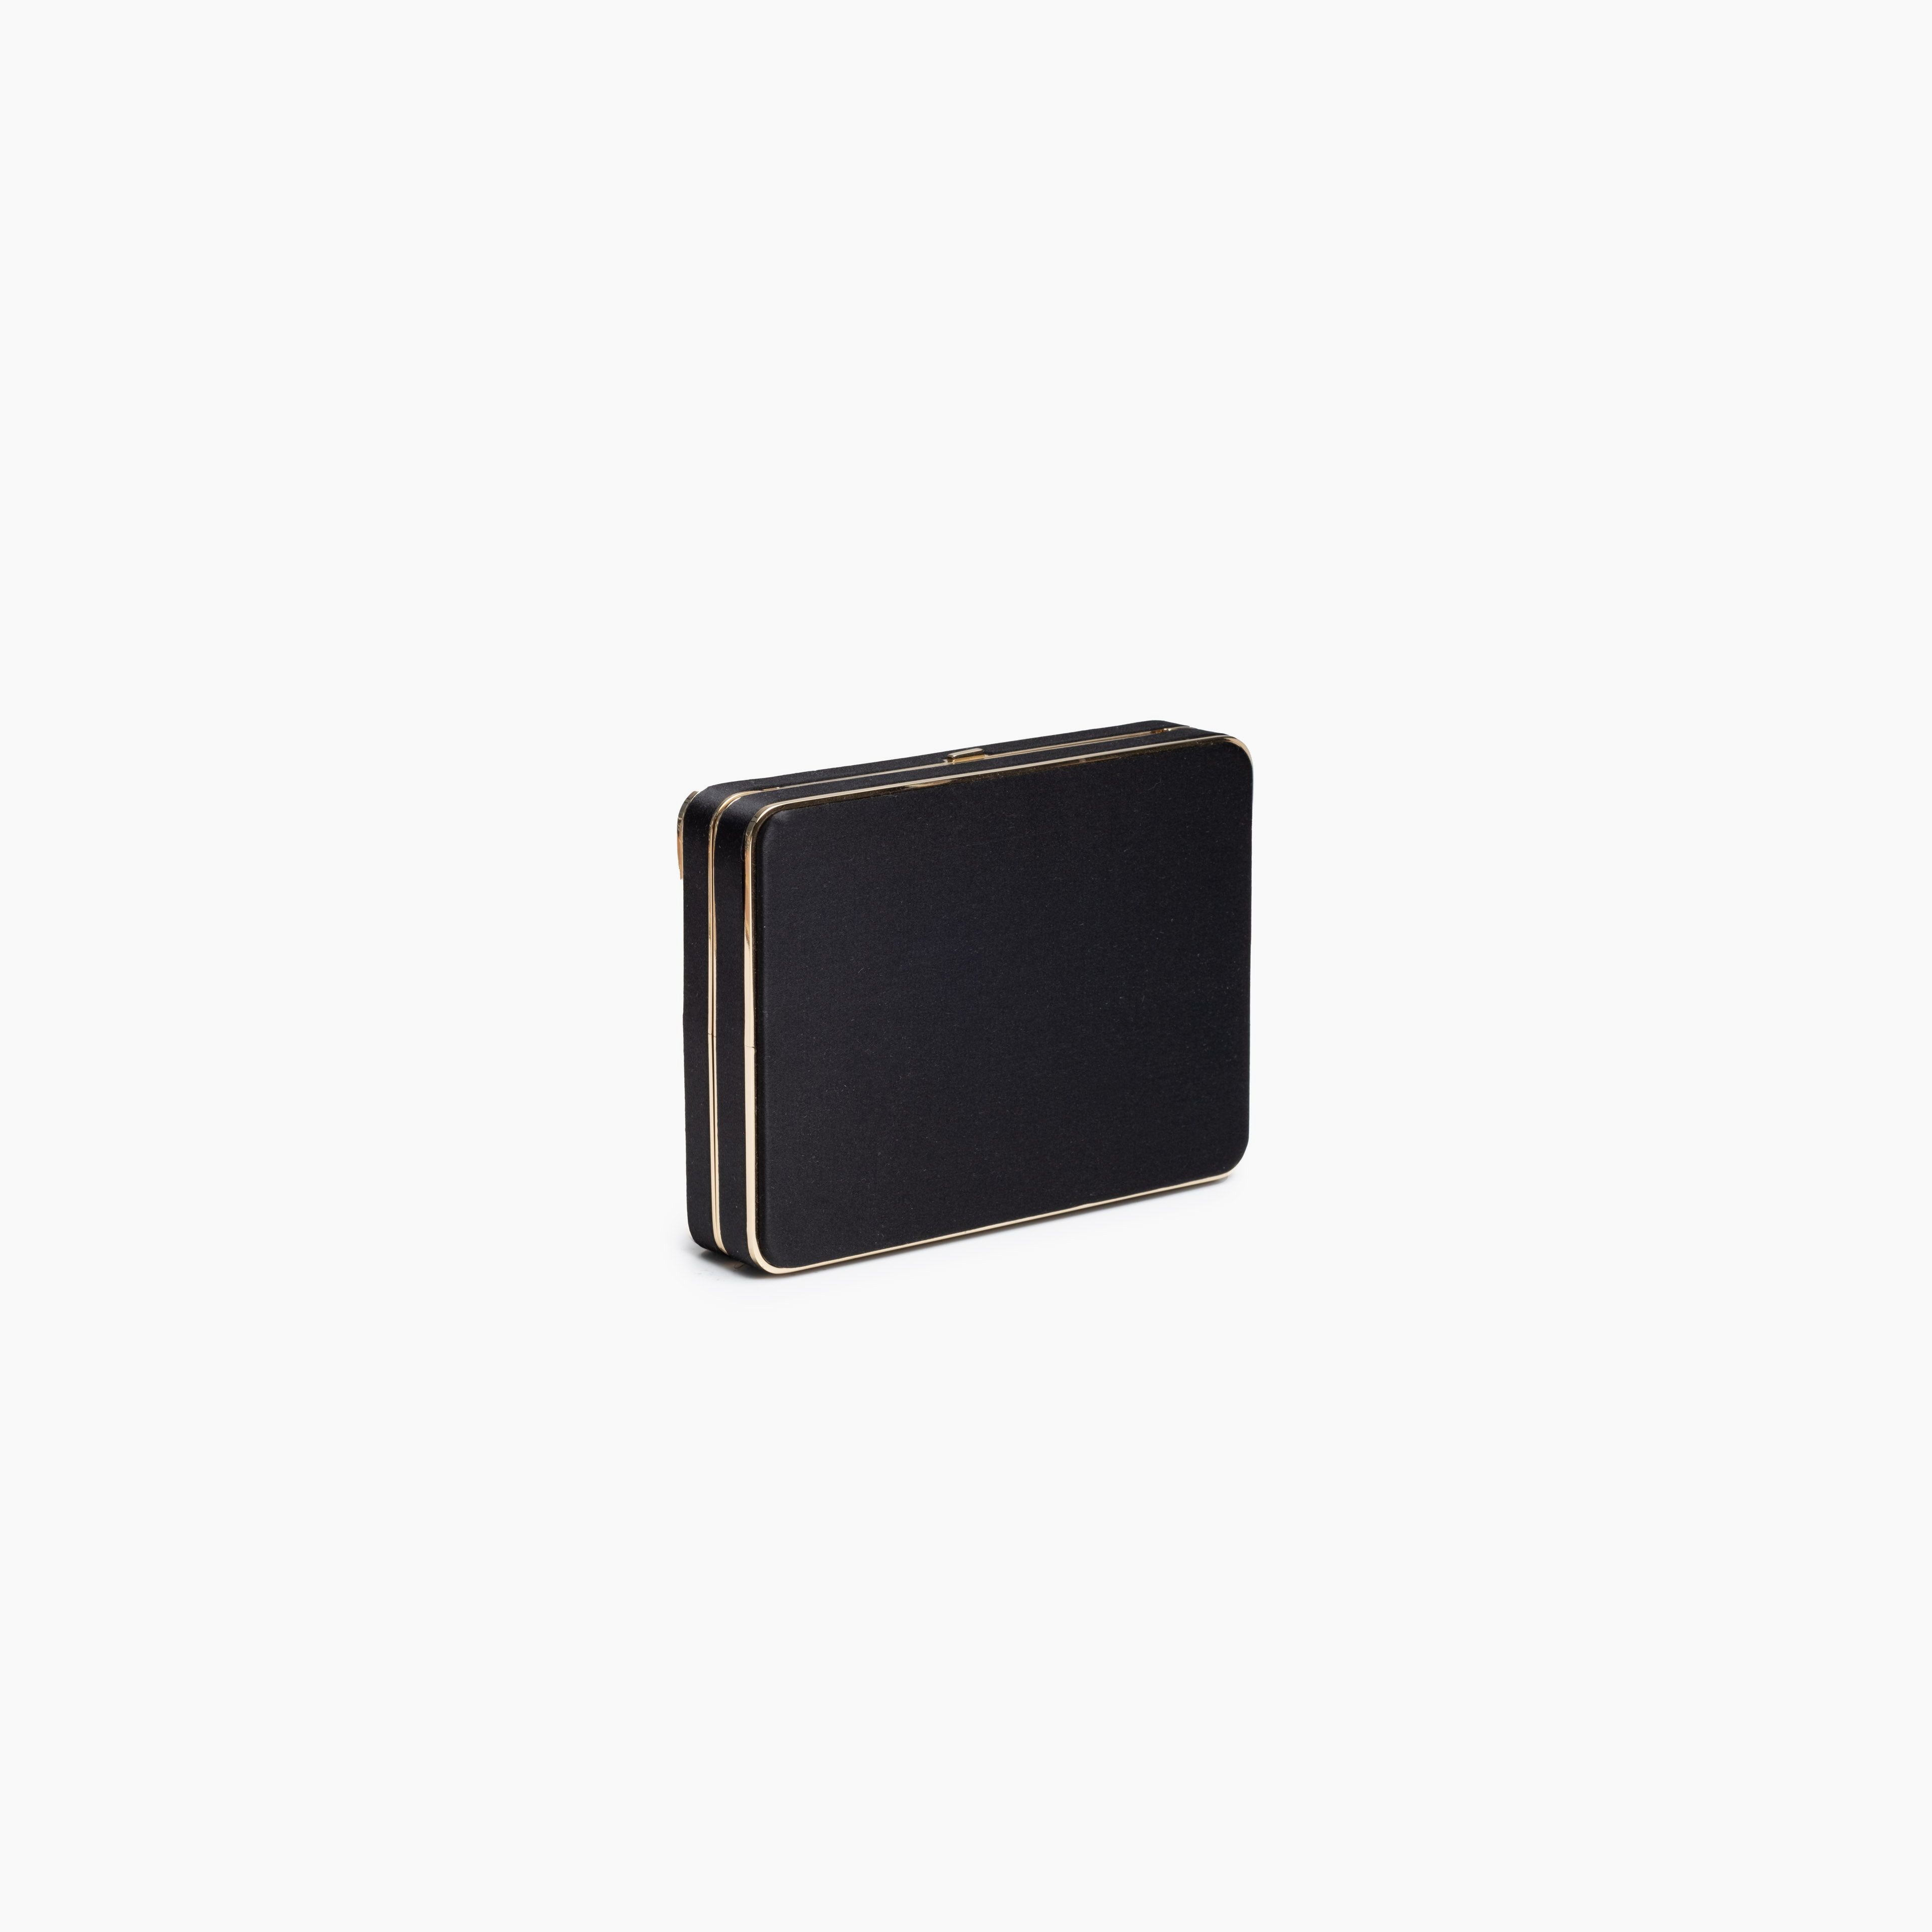 The Square Compact Case in Satin